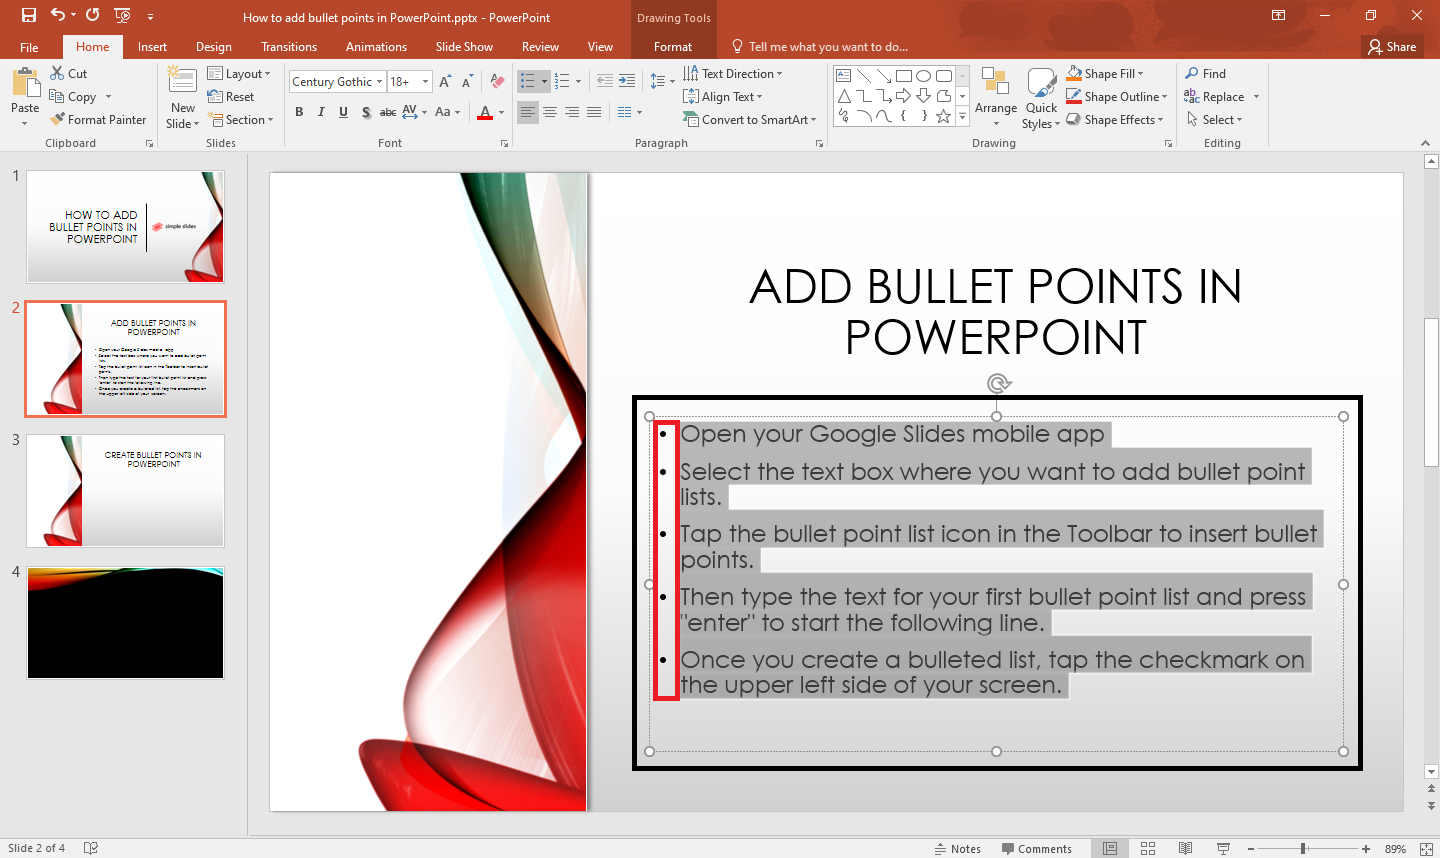 You already have bullet point lists in presentation.